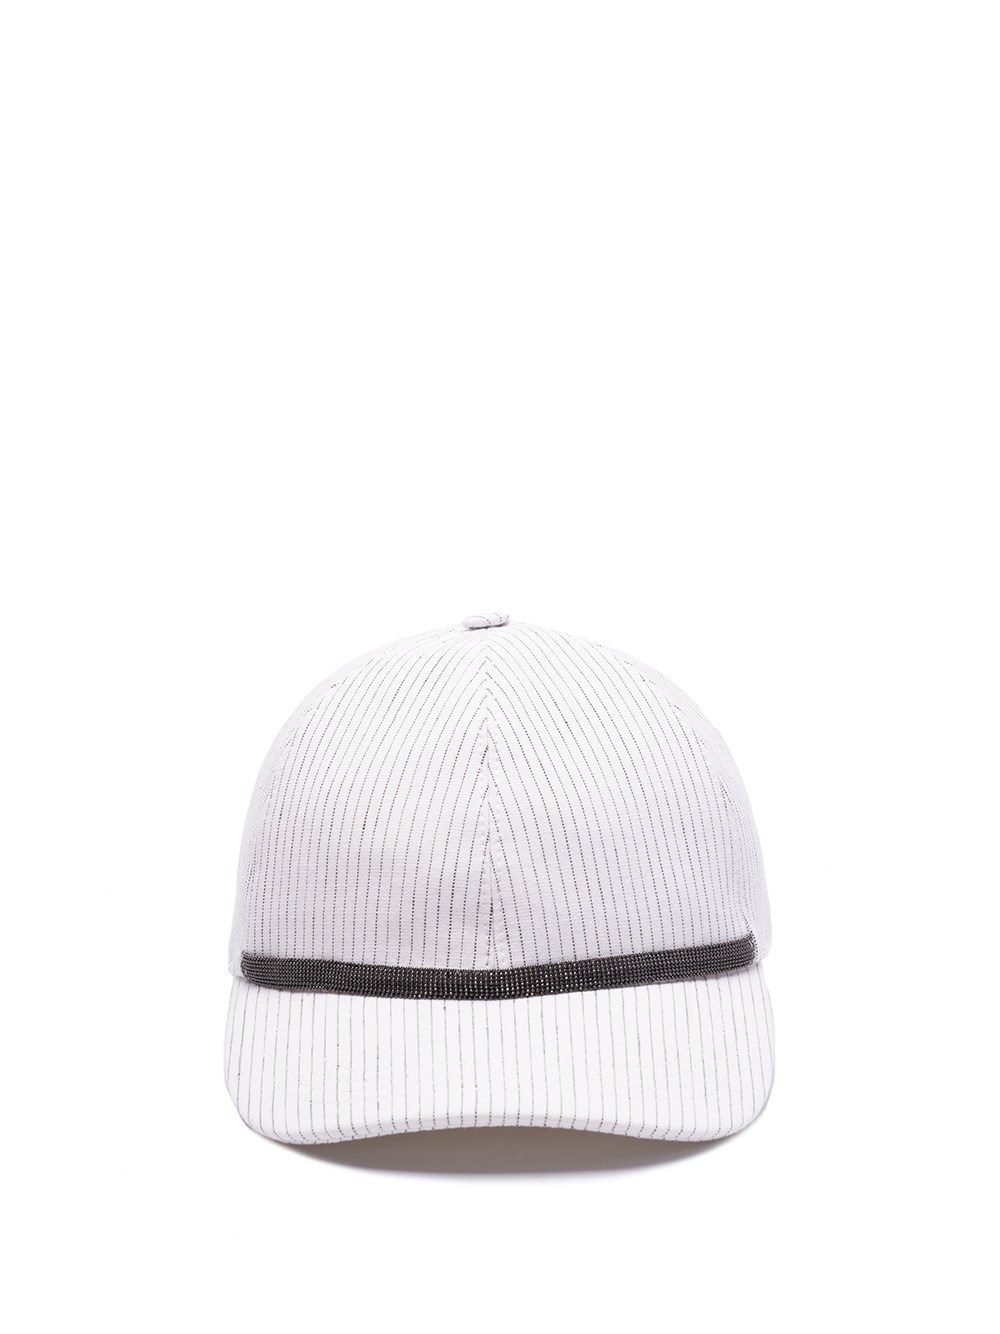 Brunello Cucinelli Striped Baseball Cap With Shiny Band In White